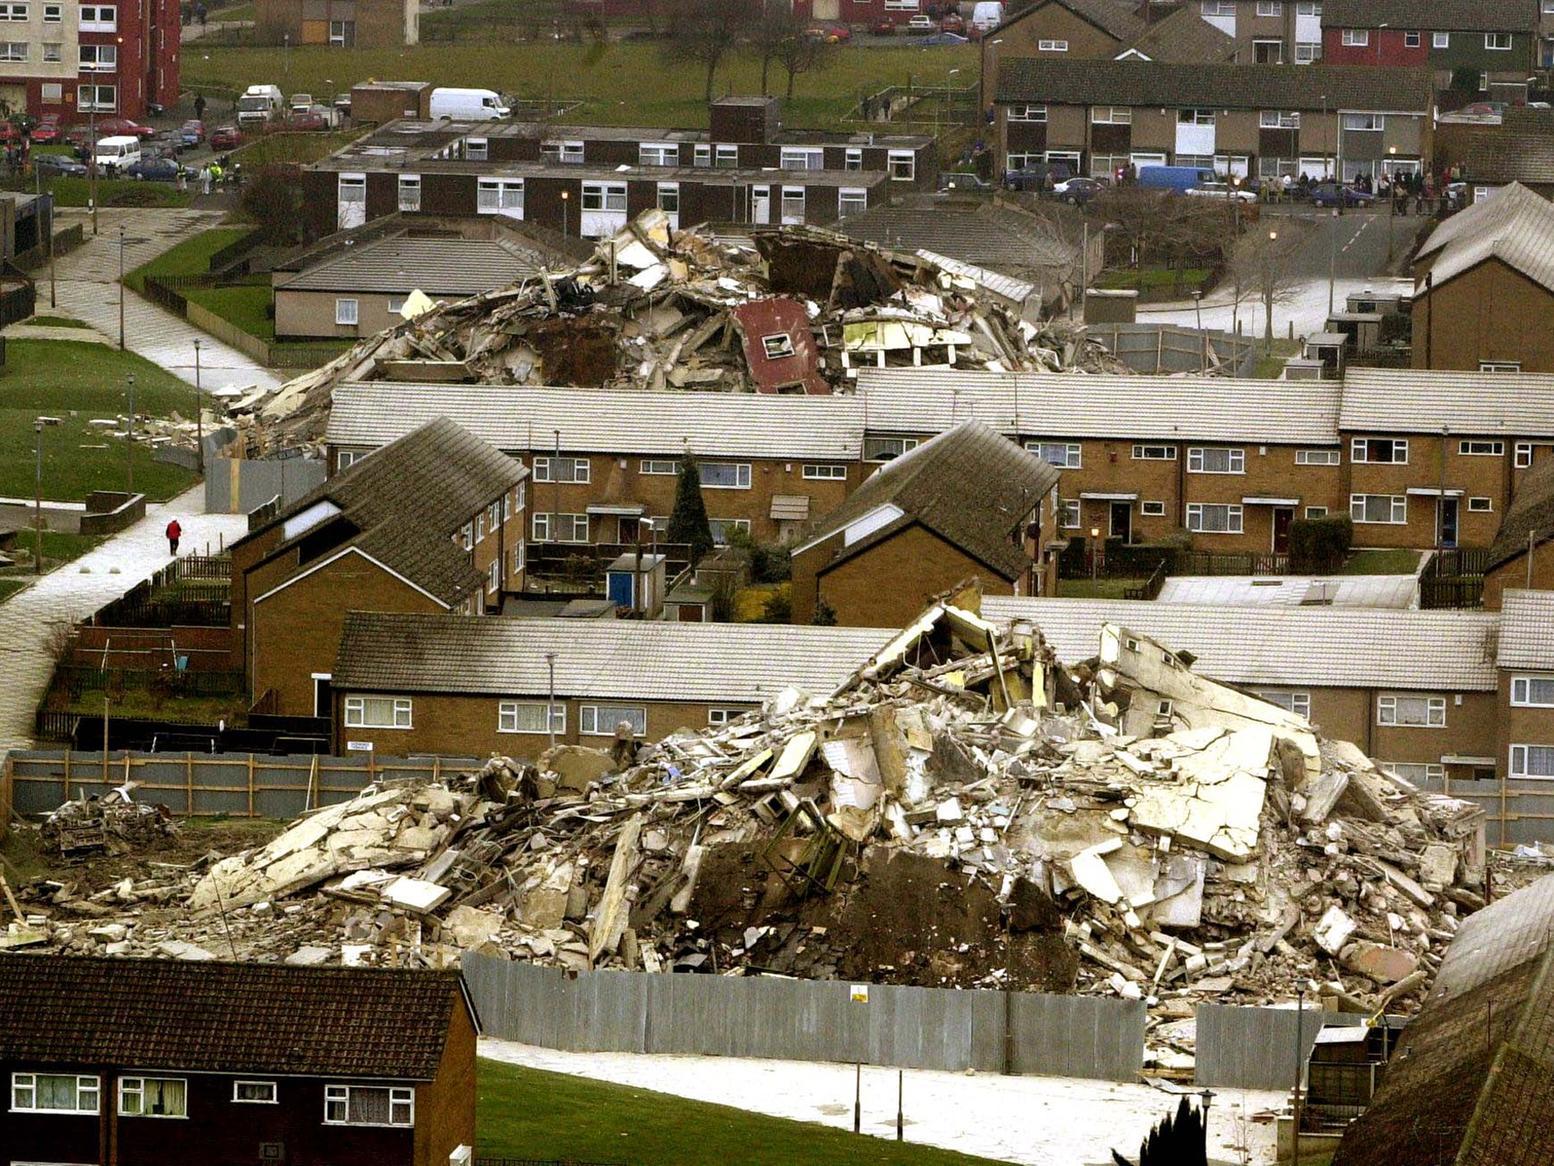 The remains of two blocks of flats - Brayton Grange and Farndale Court - that were demolished in Swarcliffe.